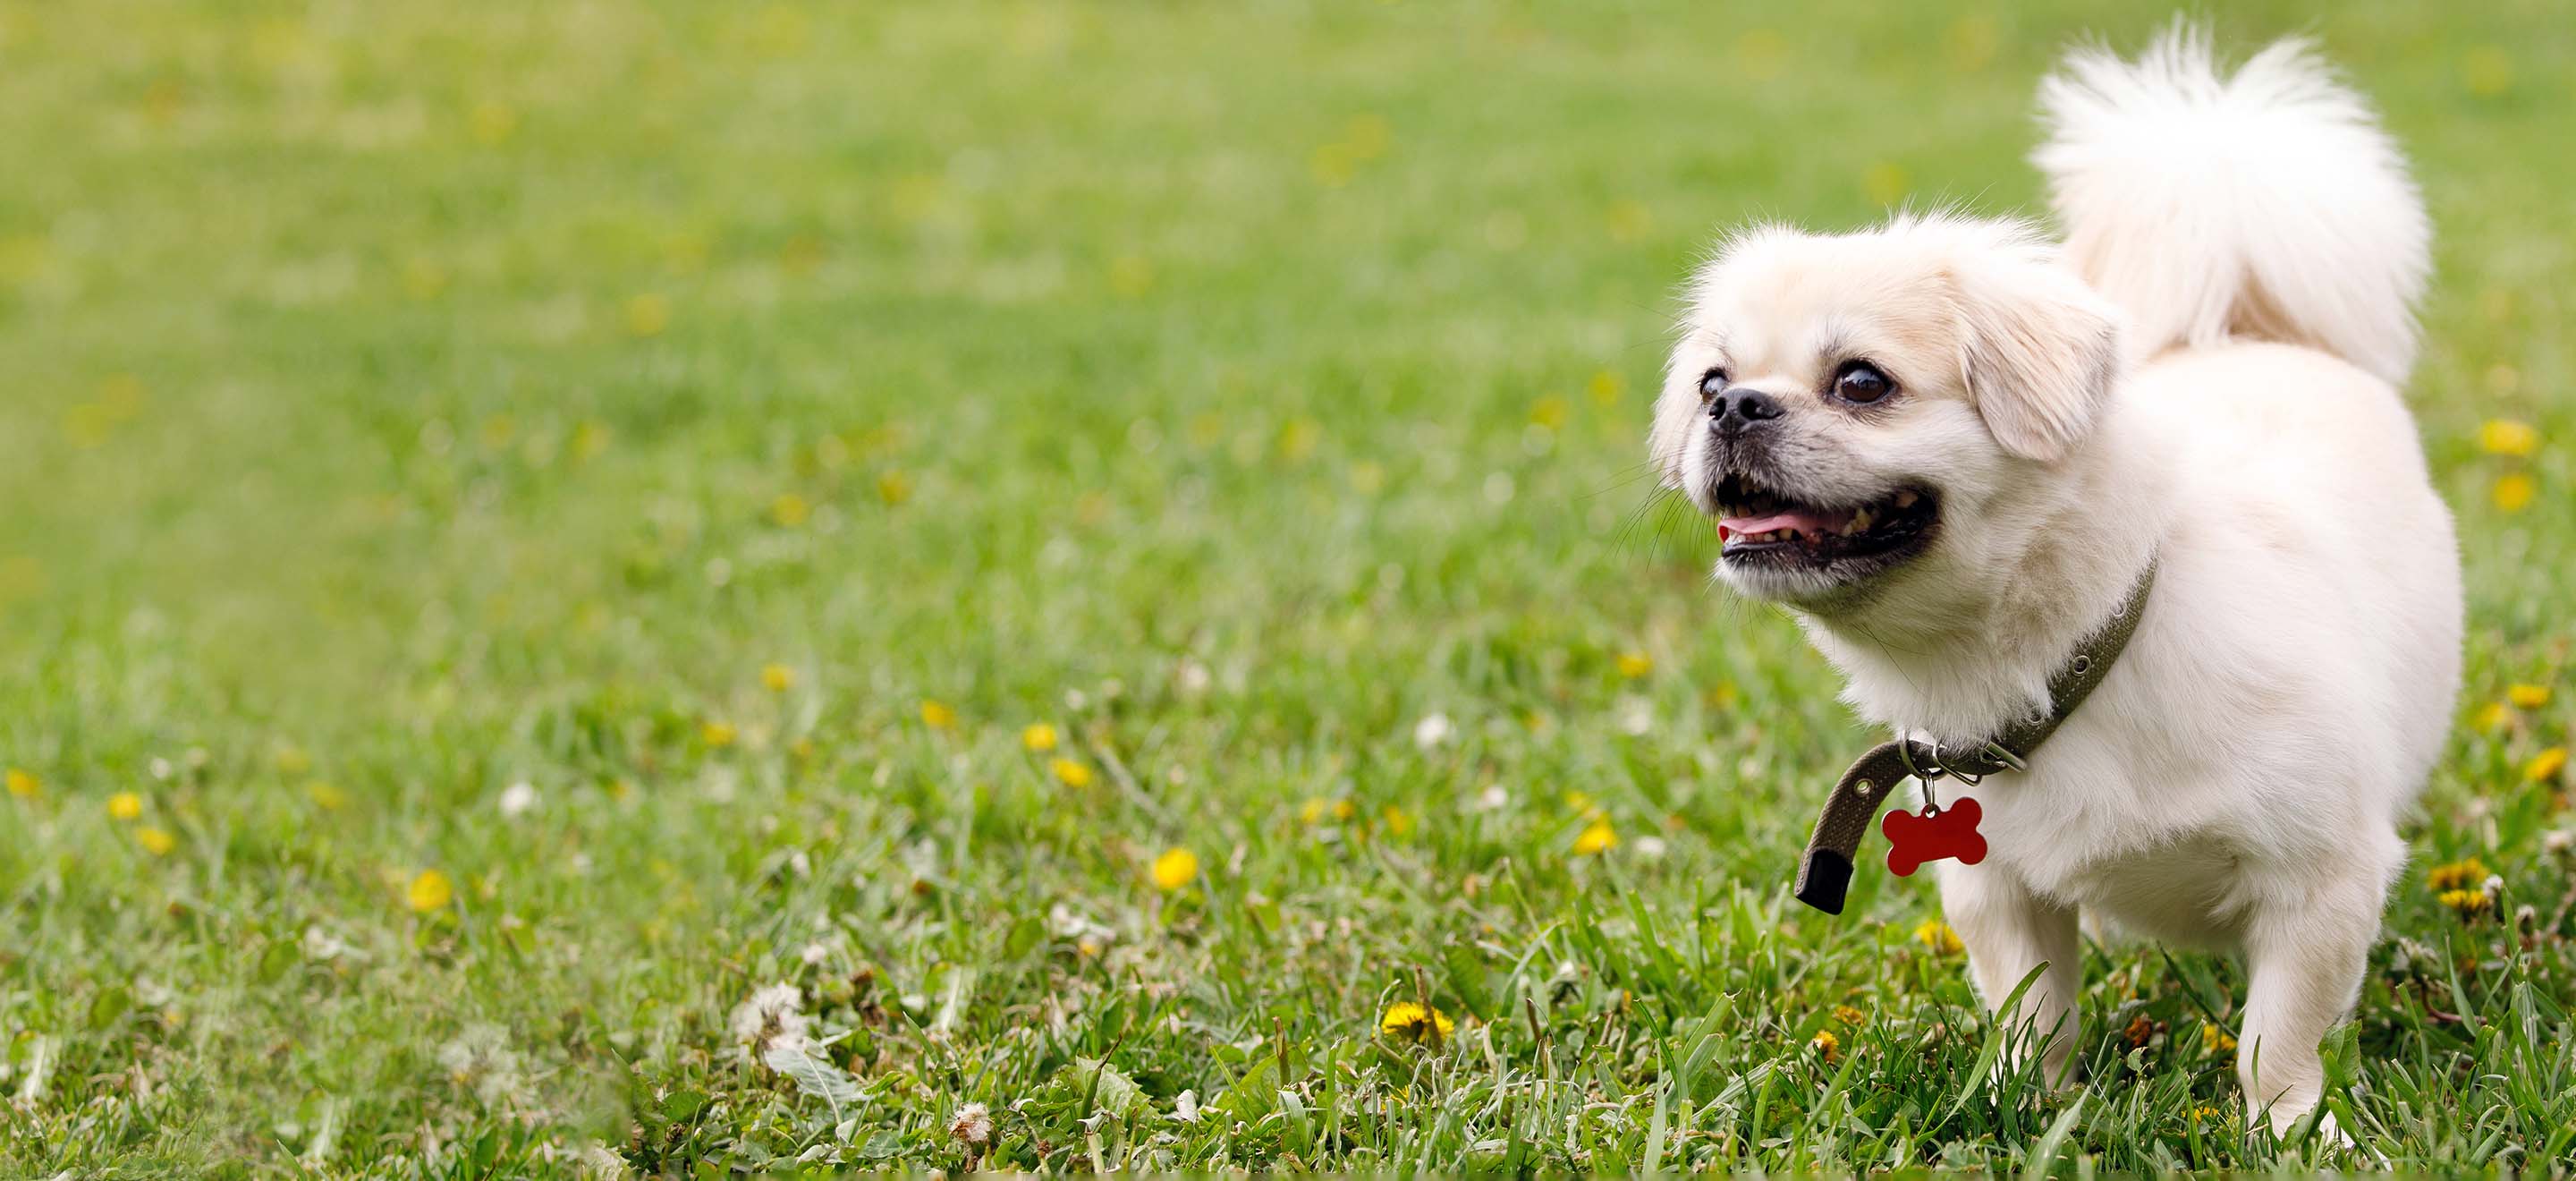 A white Tibetan Spaniel standing in a field dotted with dandelions image